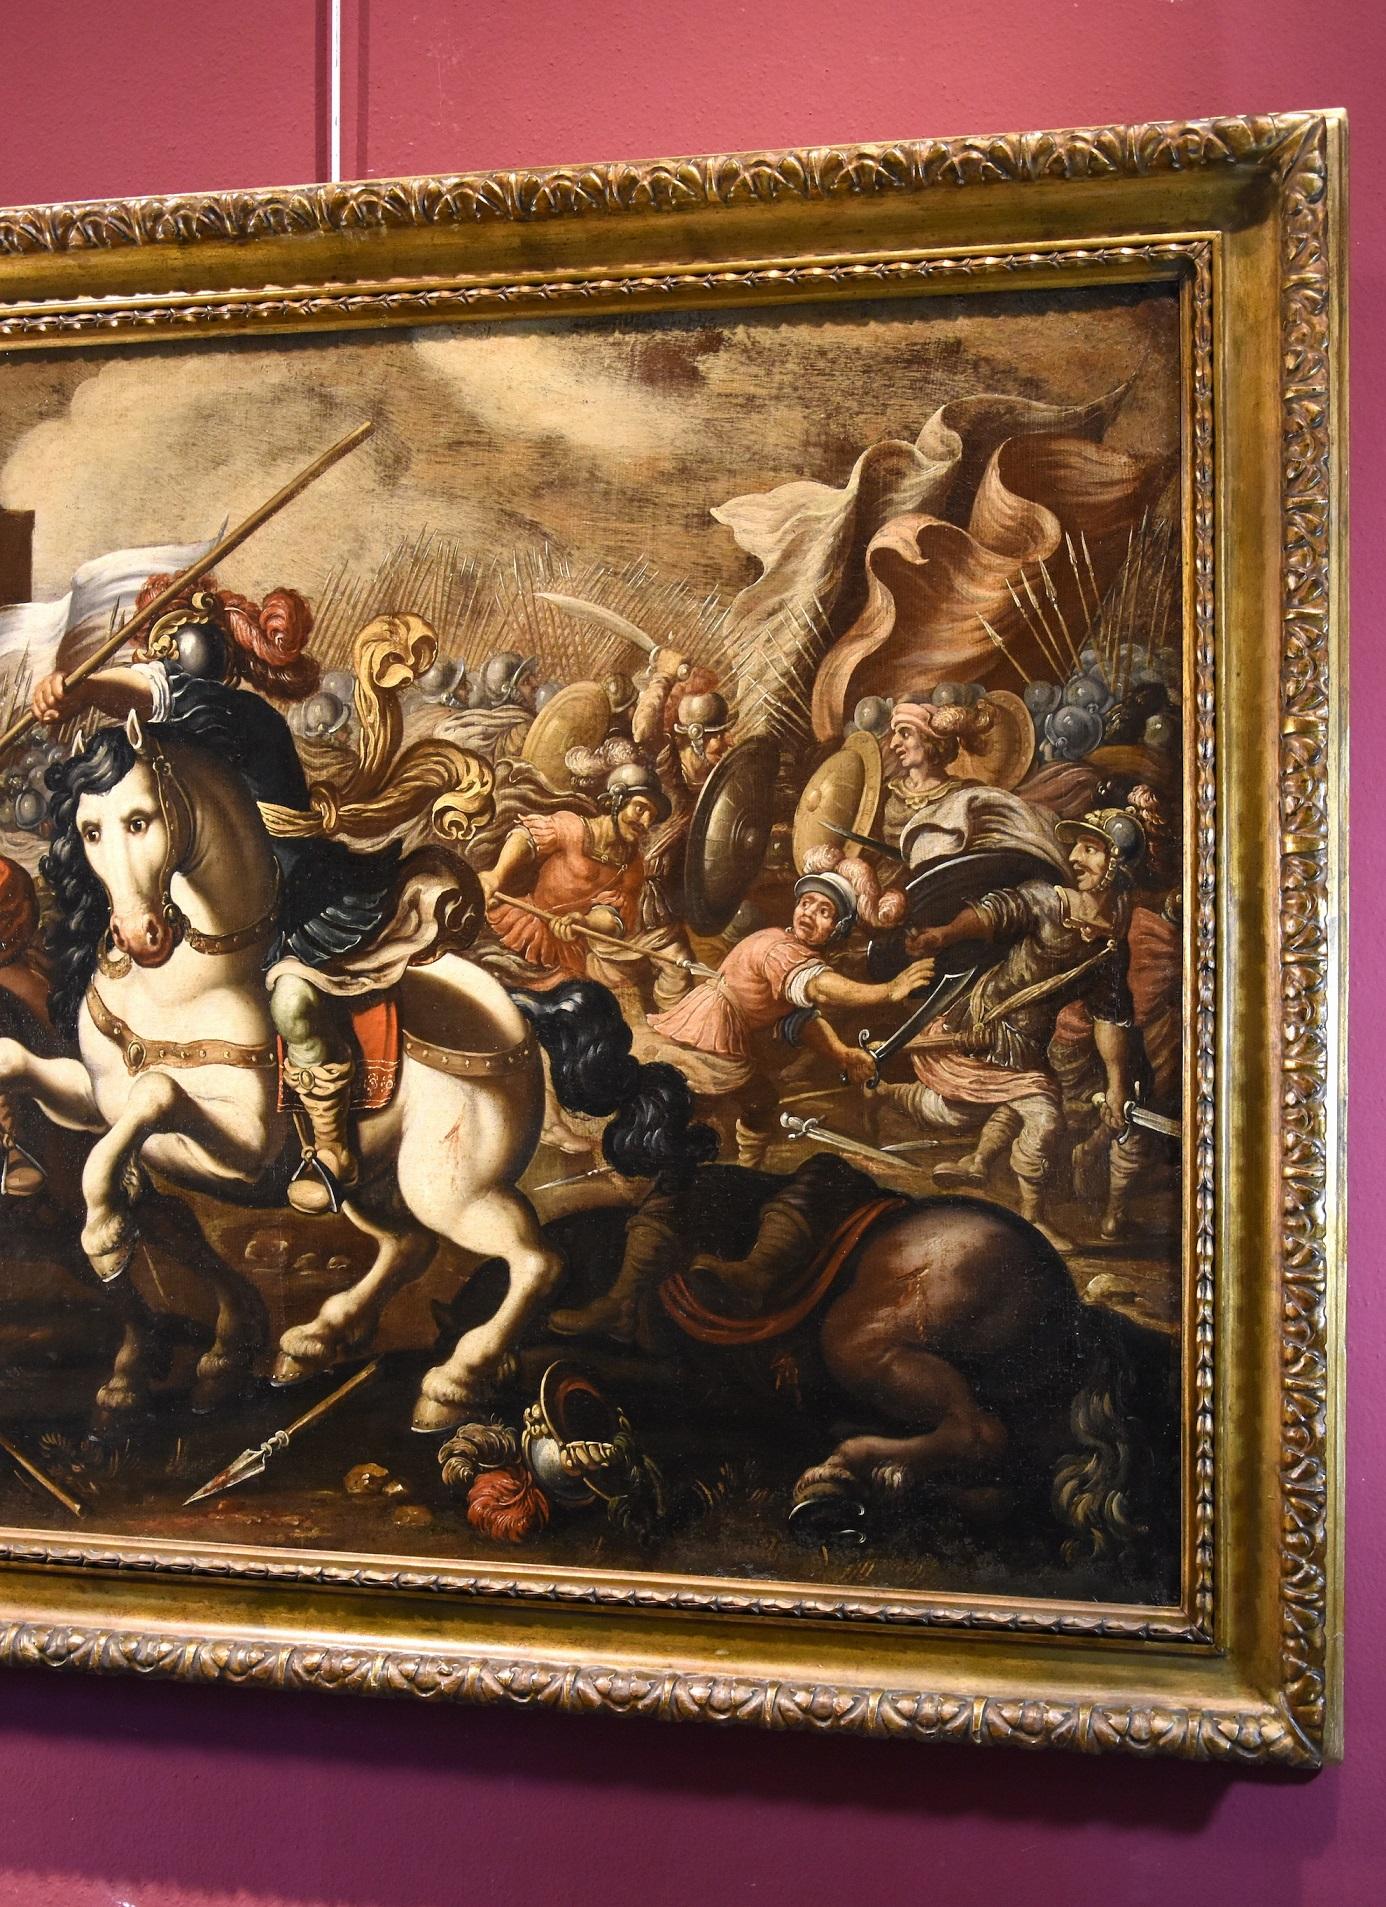 Antichità Castelbarco SRLS is proud to present:

Antonio Tempesta (Florence 1555 - Rome 1630)
Scene of battle between knights

Oil on canvas (81 x 130 cm - Framed 99 x 130)

Expertise of Prof. Giancarlo Sestieri

This is a magnificent painting